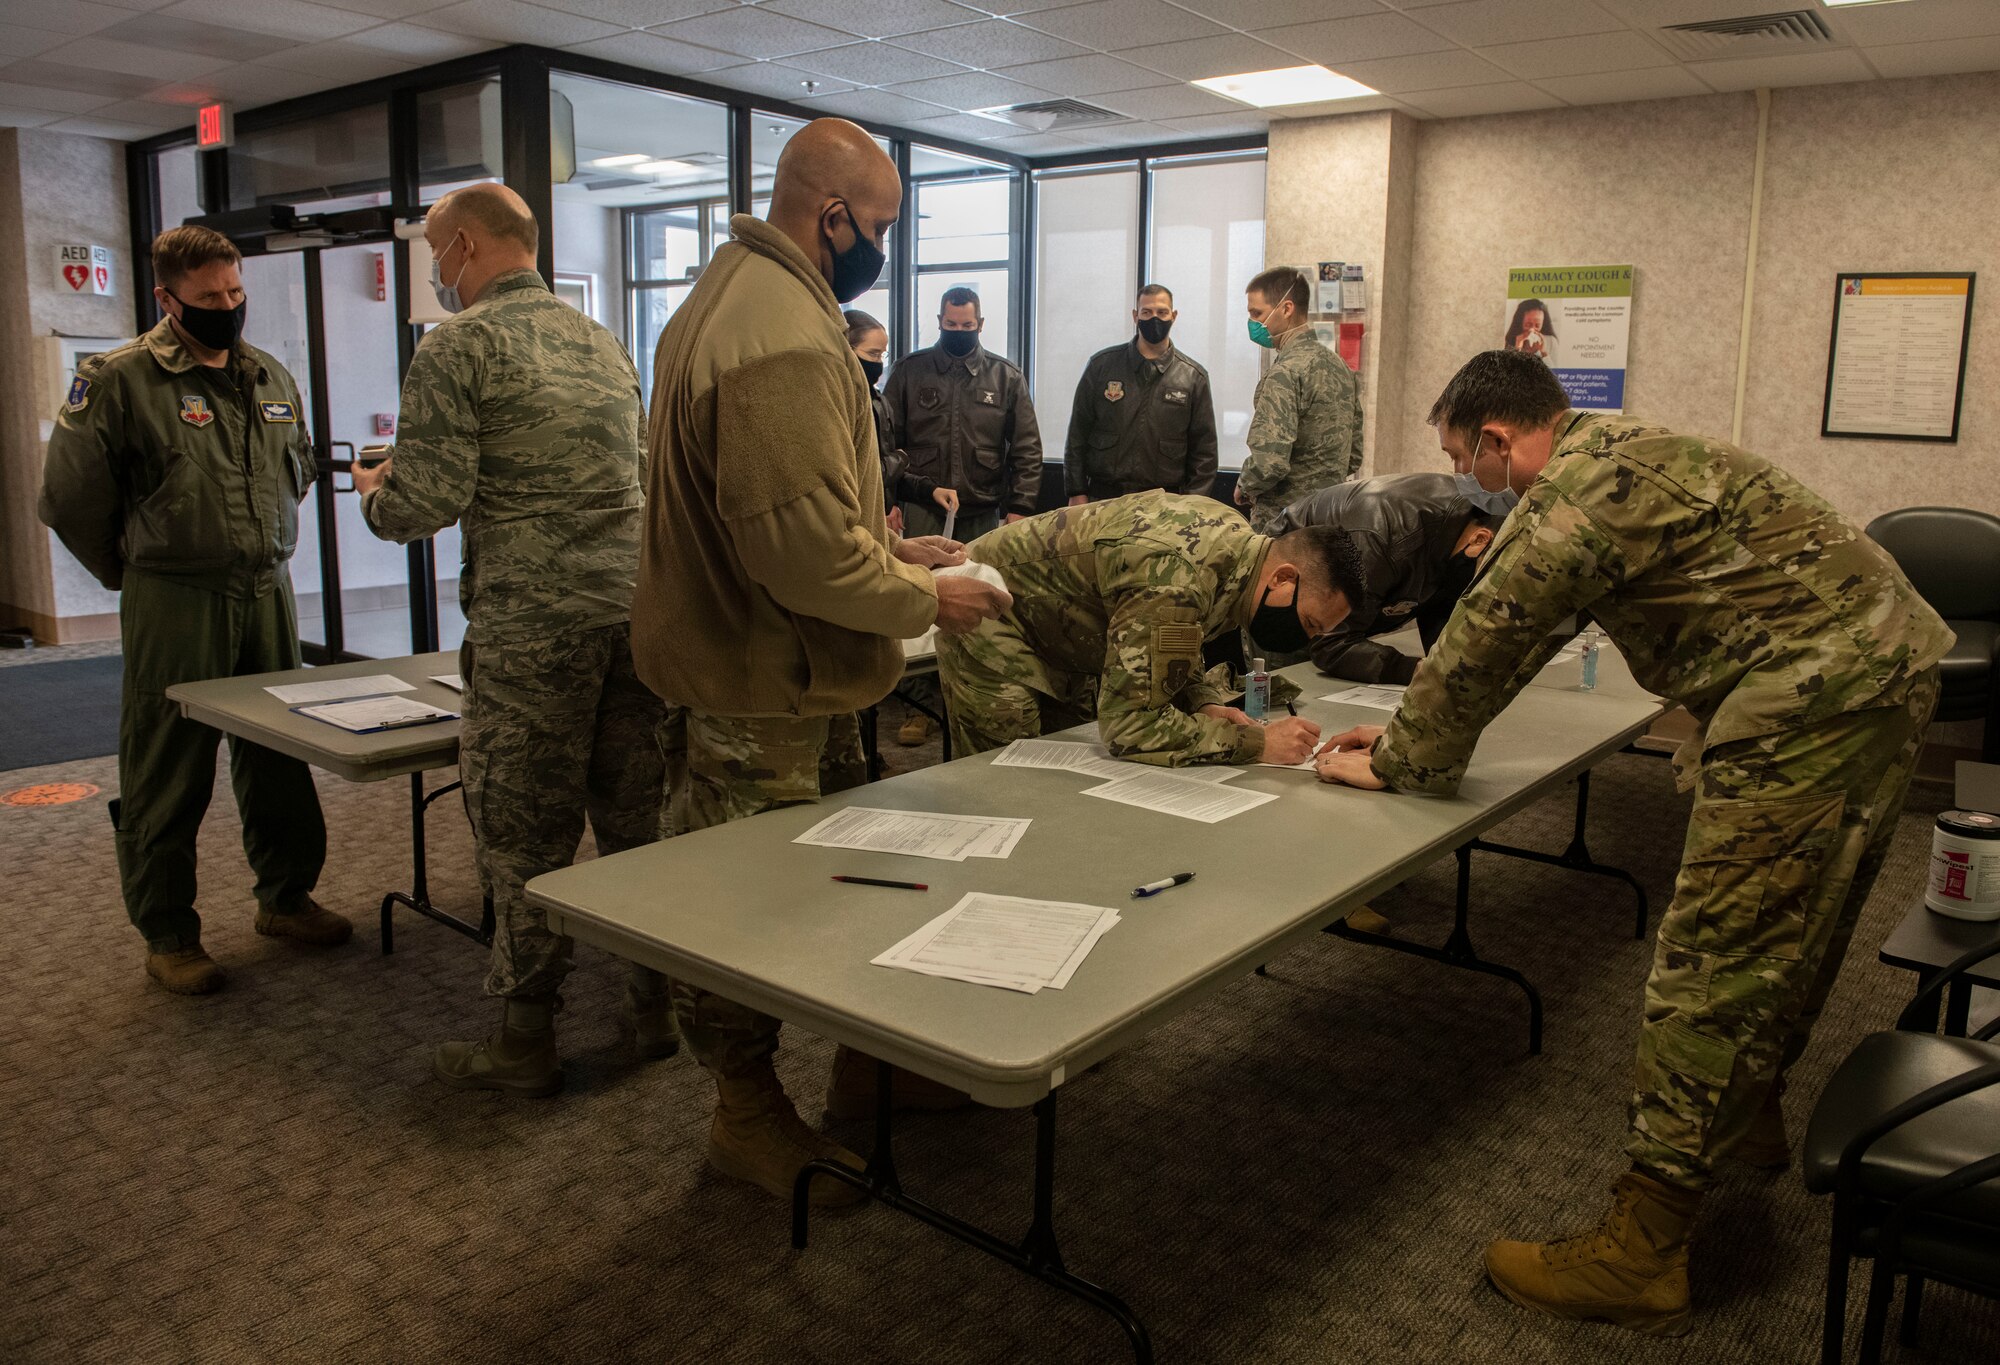 Grand Forks airmen register to receive the COVID-19 vaccine at Grand Forks Air Force Base, N.D., Jan. 22, 2021. Within 30 hours of receiving the shipment, all doses at the 319th Medical Group had been either administered or allocated to base personnel.